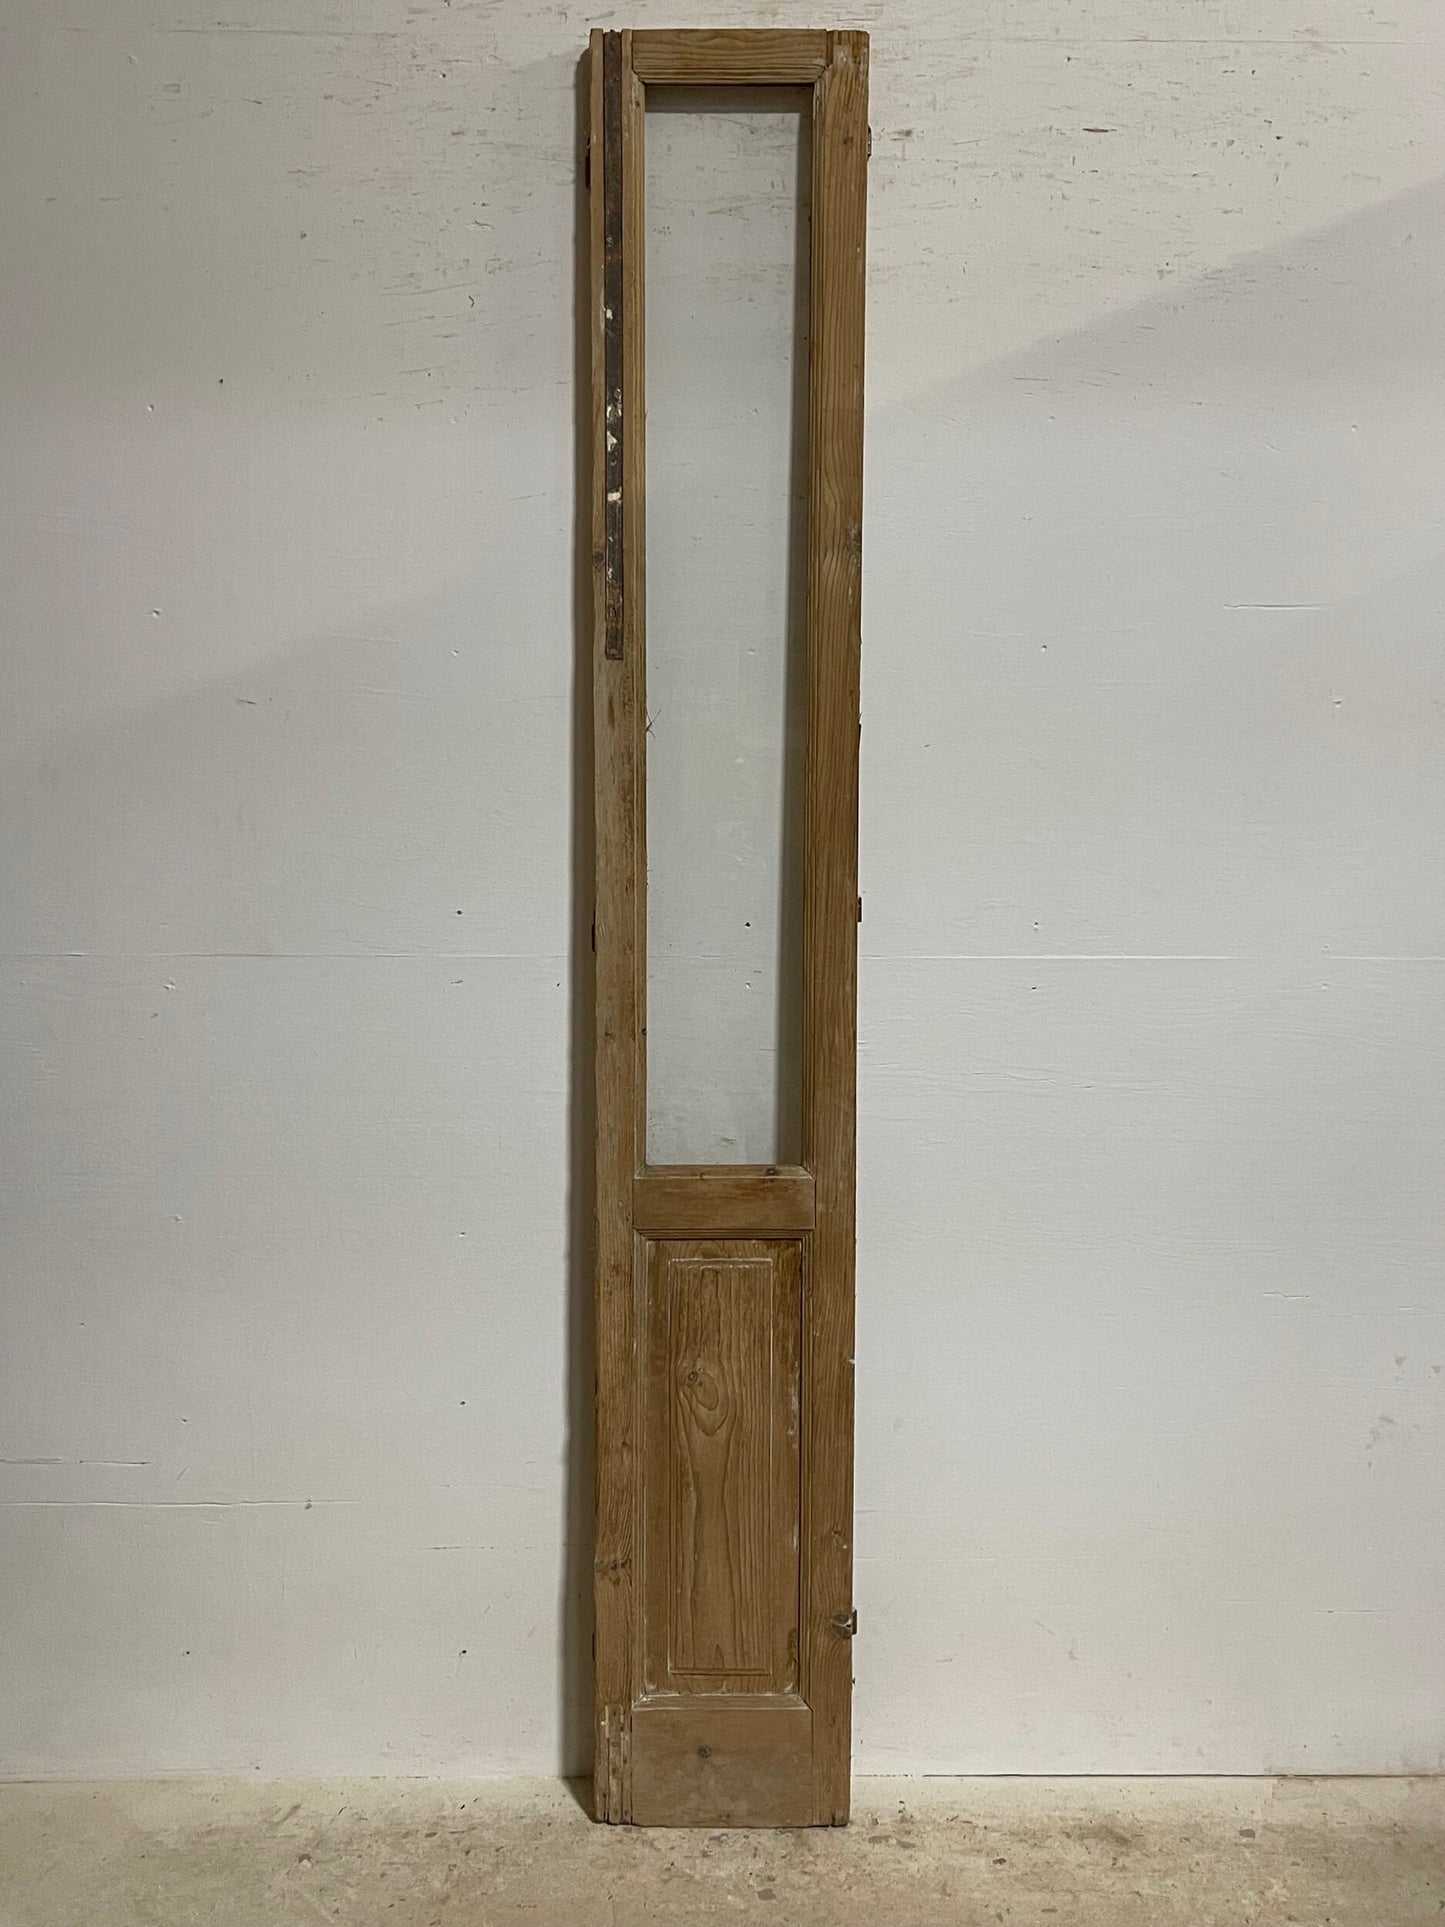 Antique French door with glass (95.5x14.25) H0270s